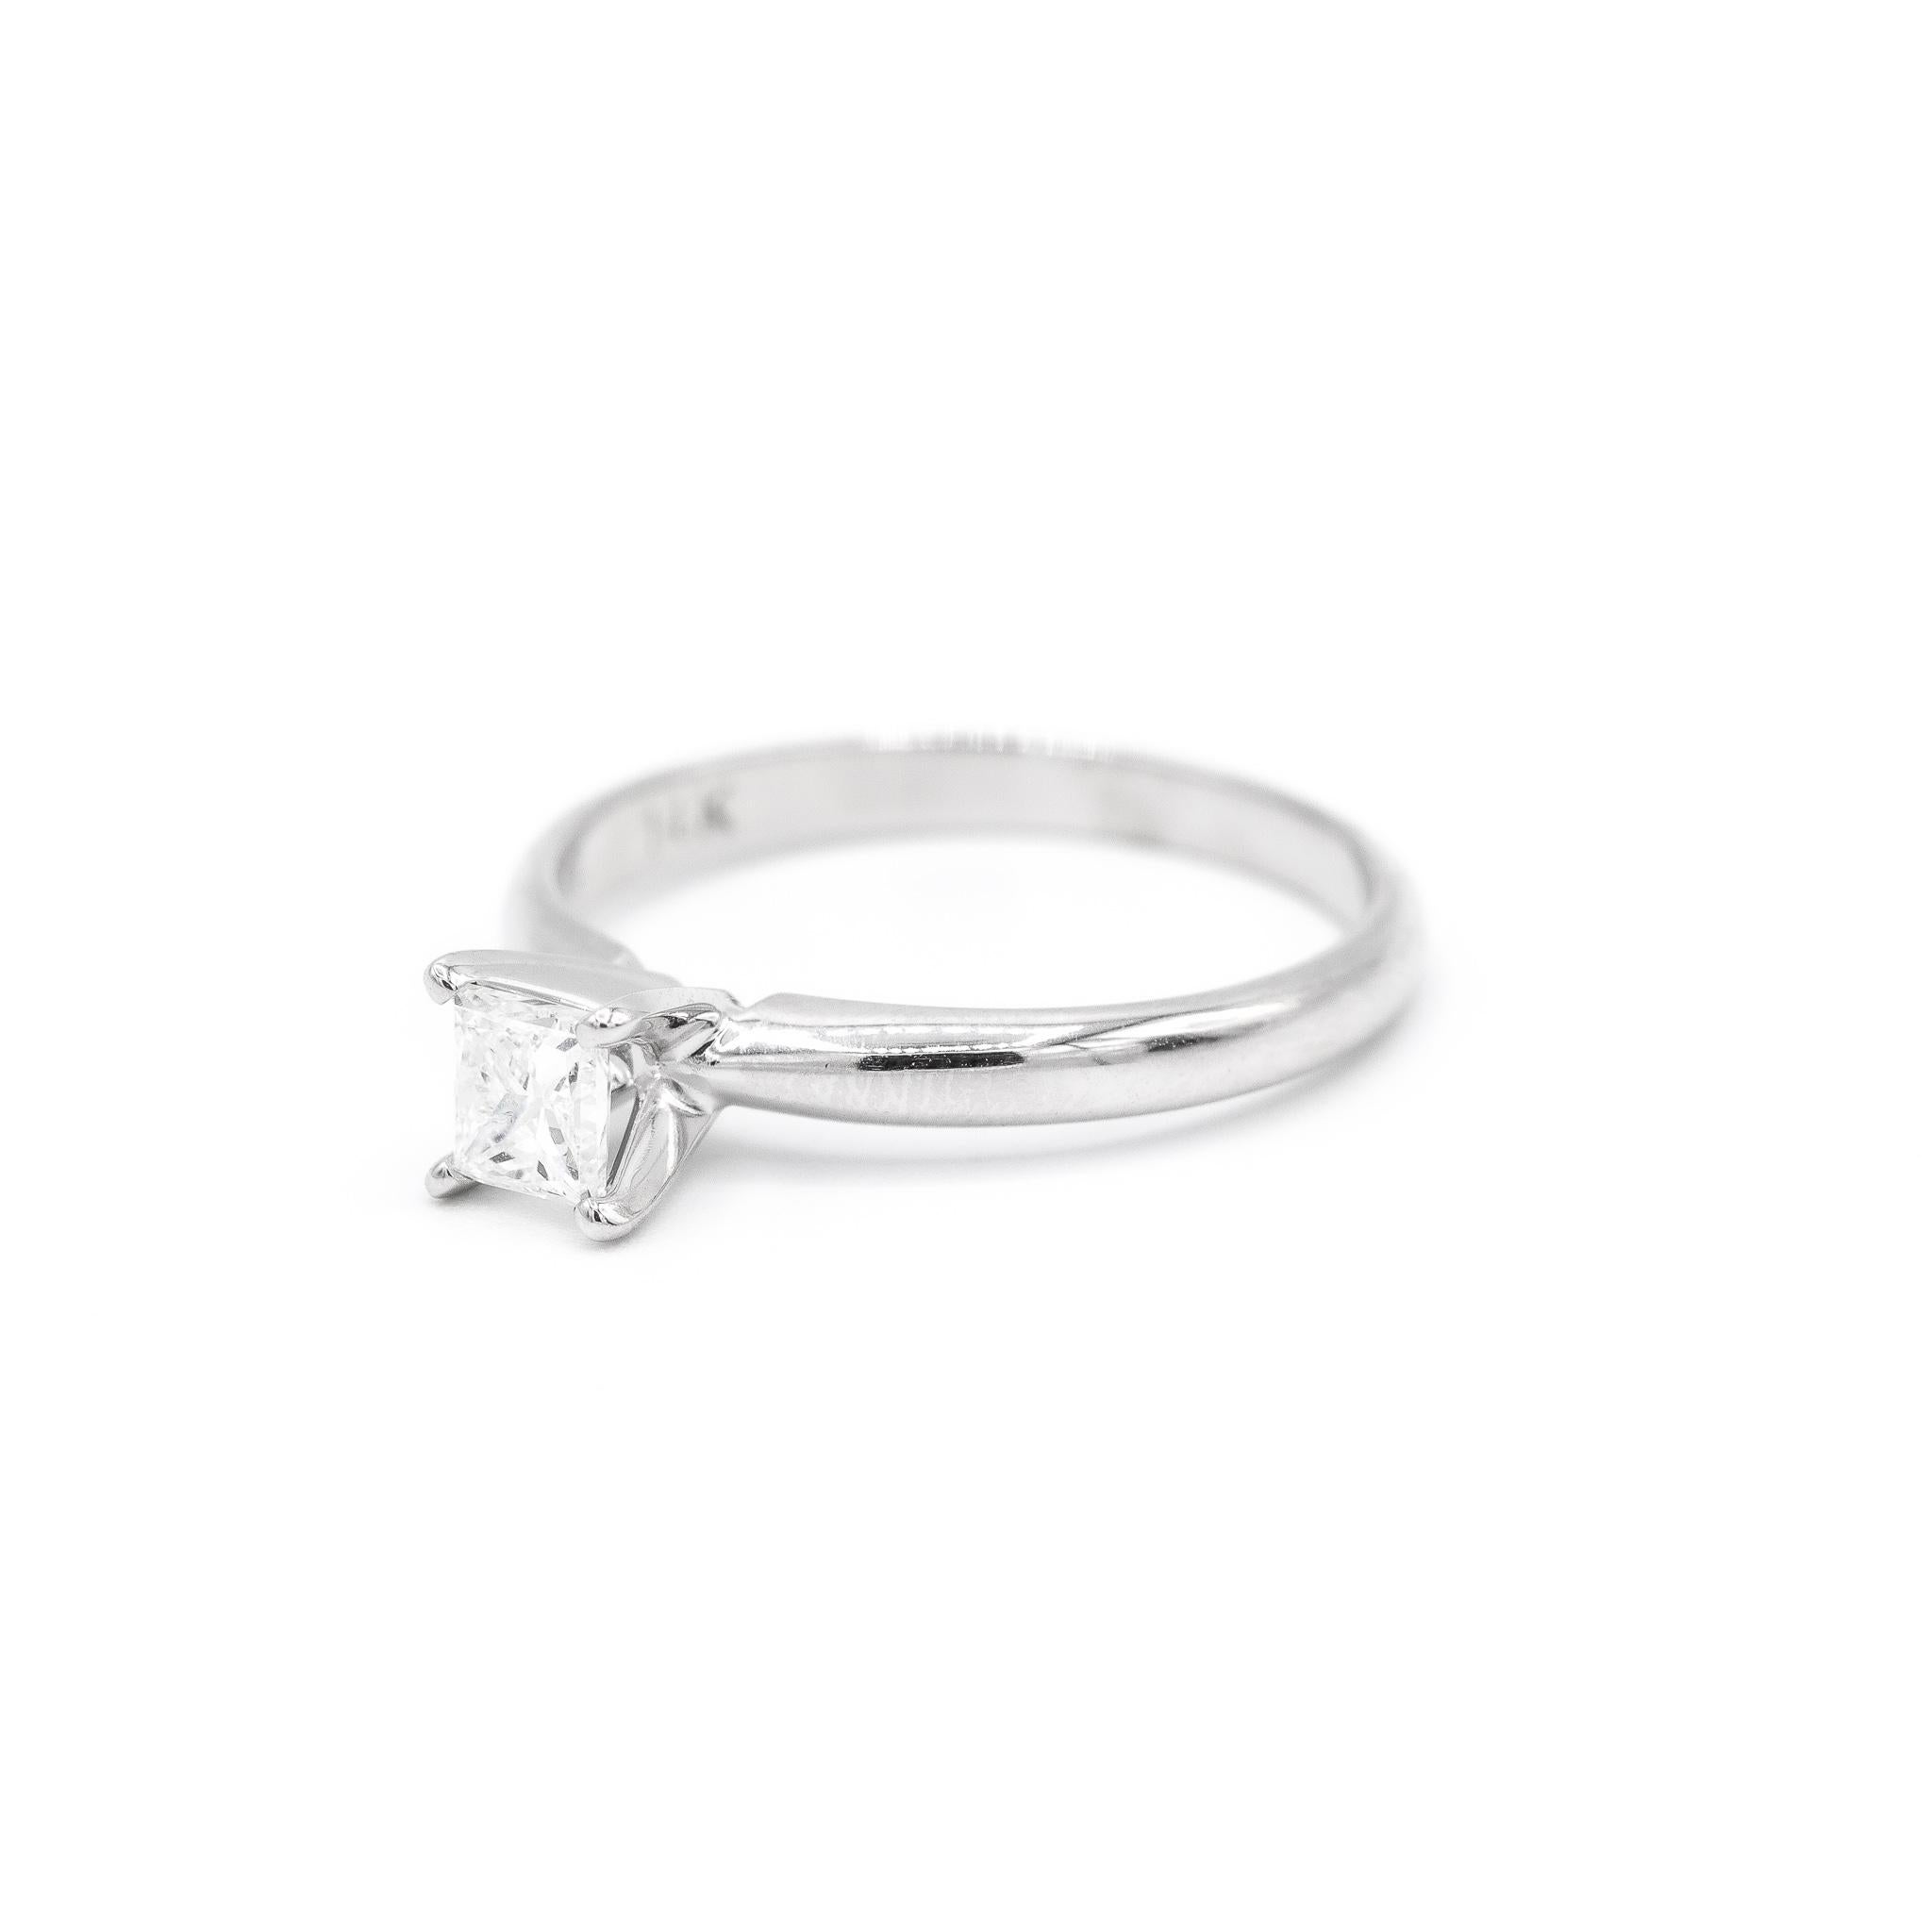 One lady's manufactured polished rhodium plated 14K white gold, diamond engagement, solitaire engagement ring with a half round shank. The ring is a size 7. The ring weighs a total of 2.40 grams. Stamped 